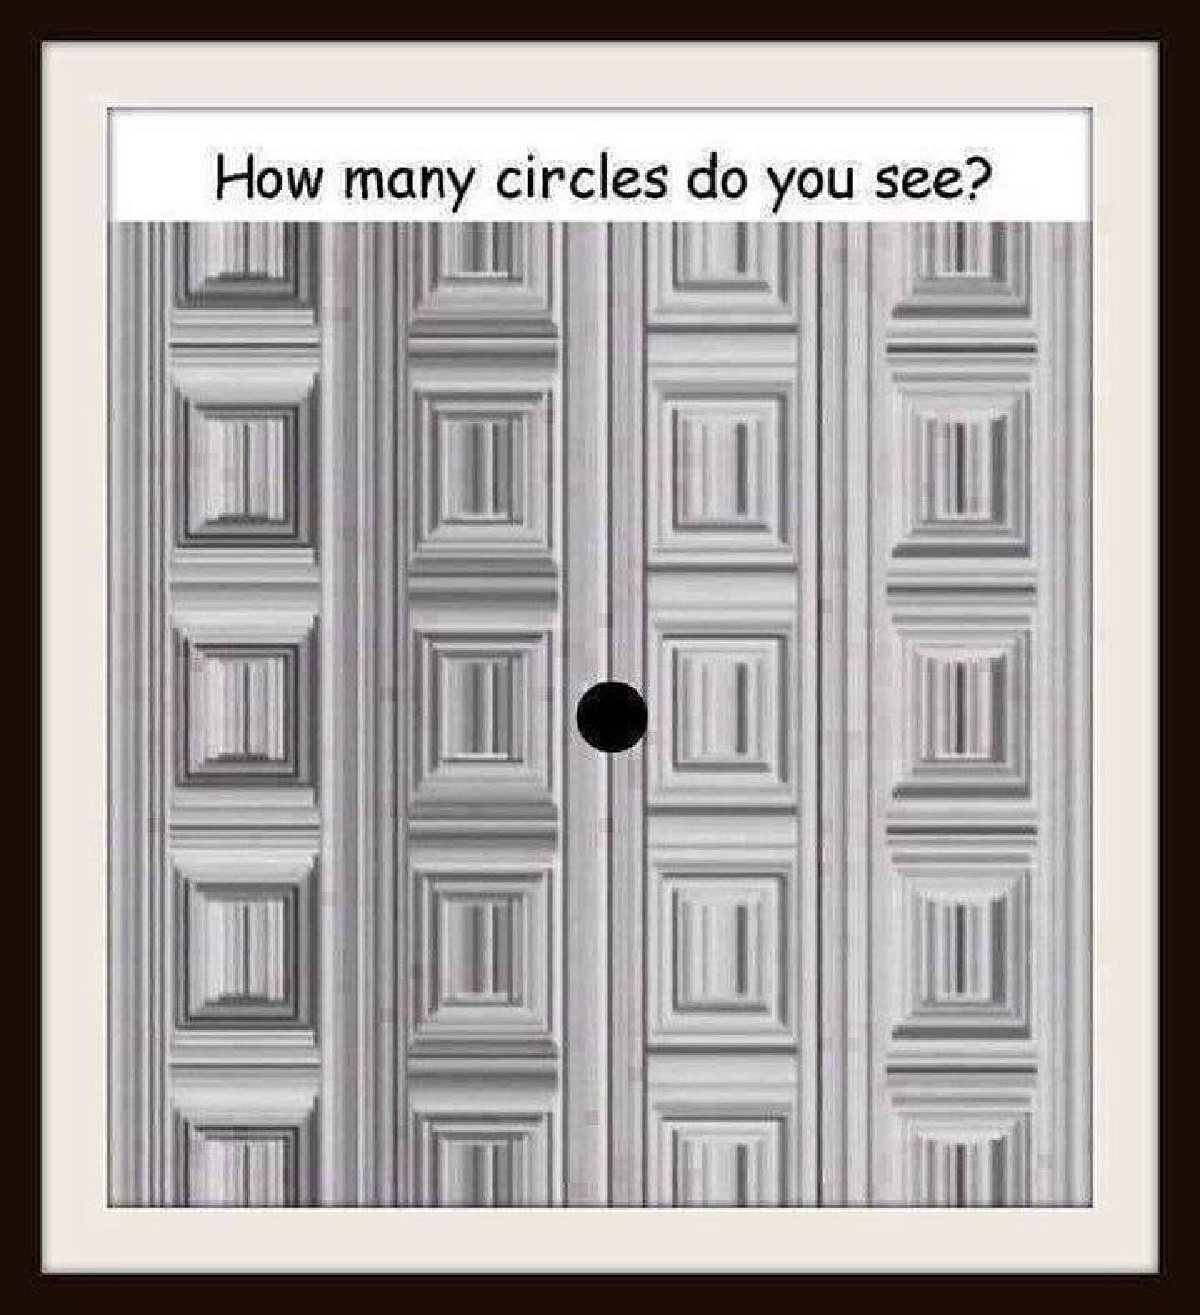 Count the number of circles in the image